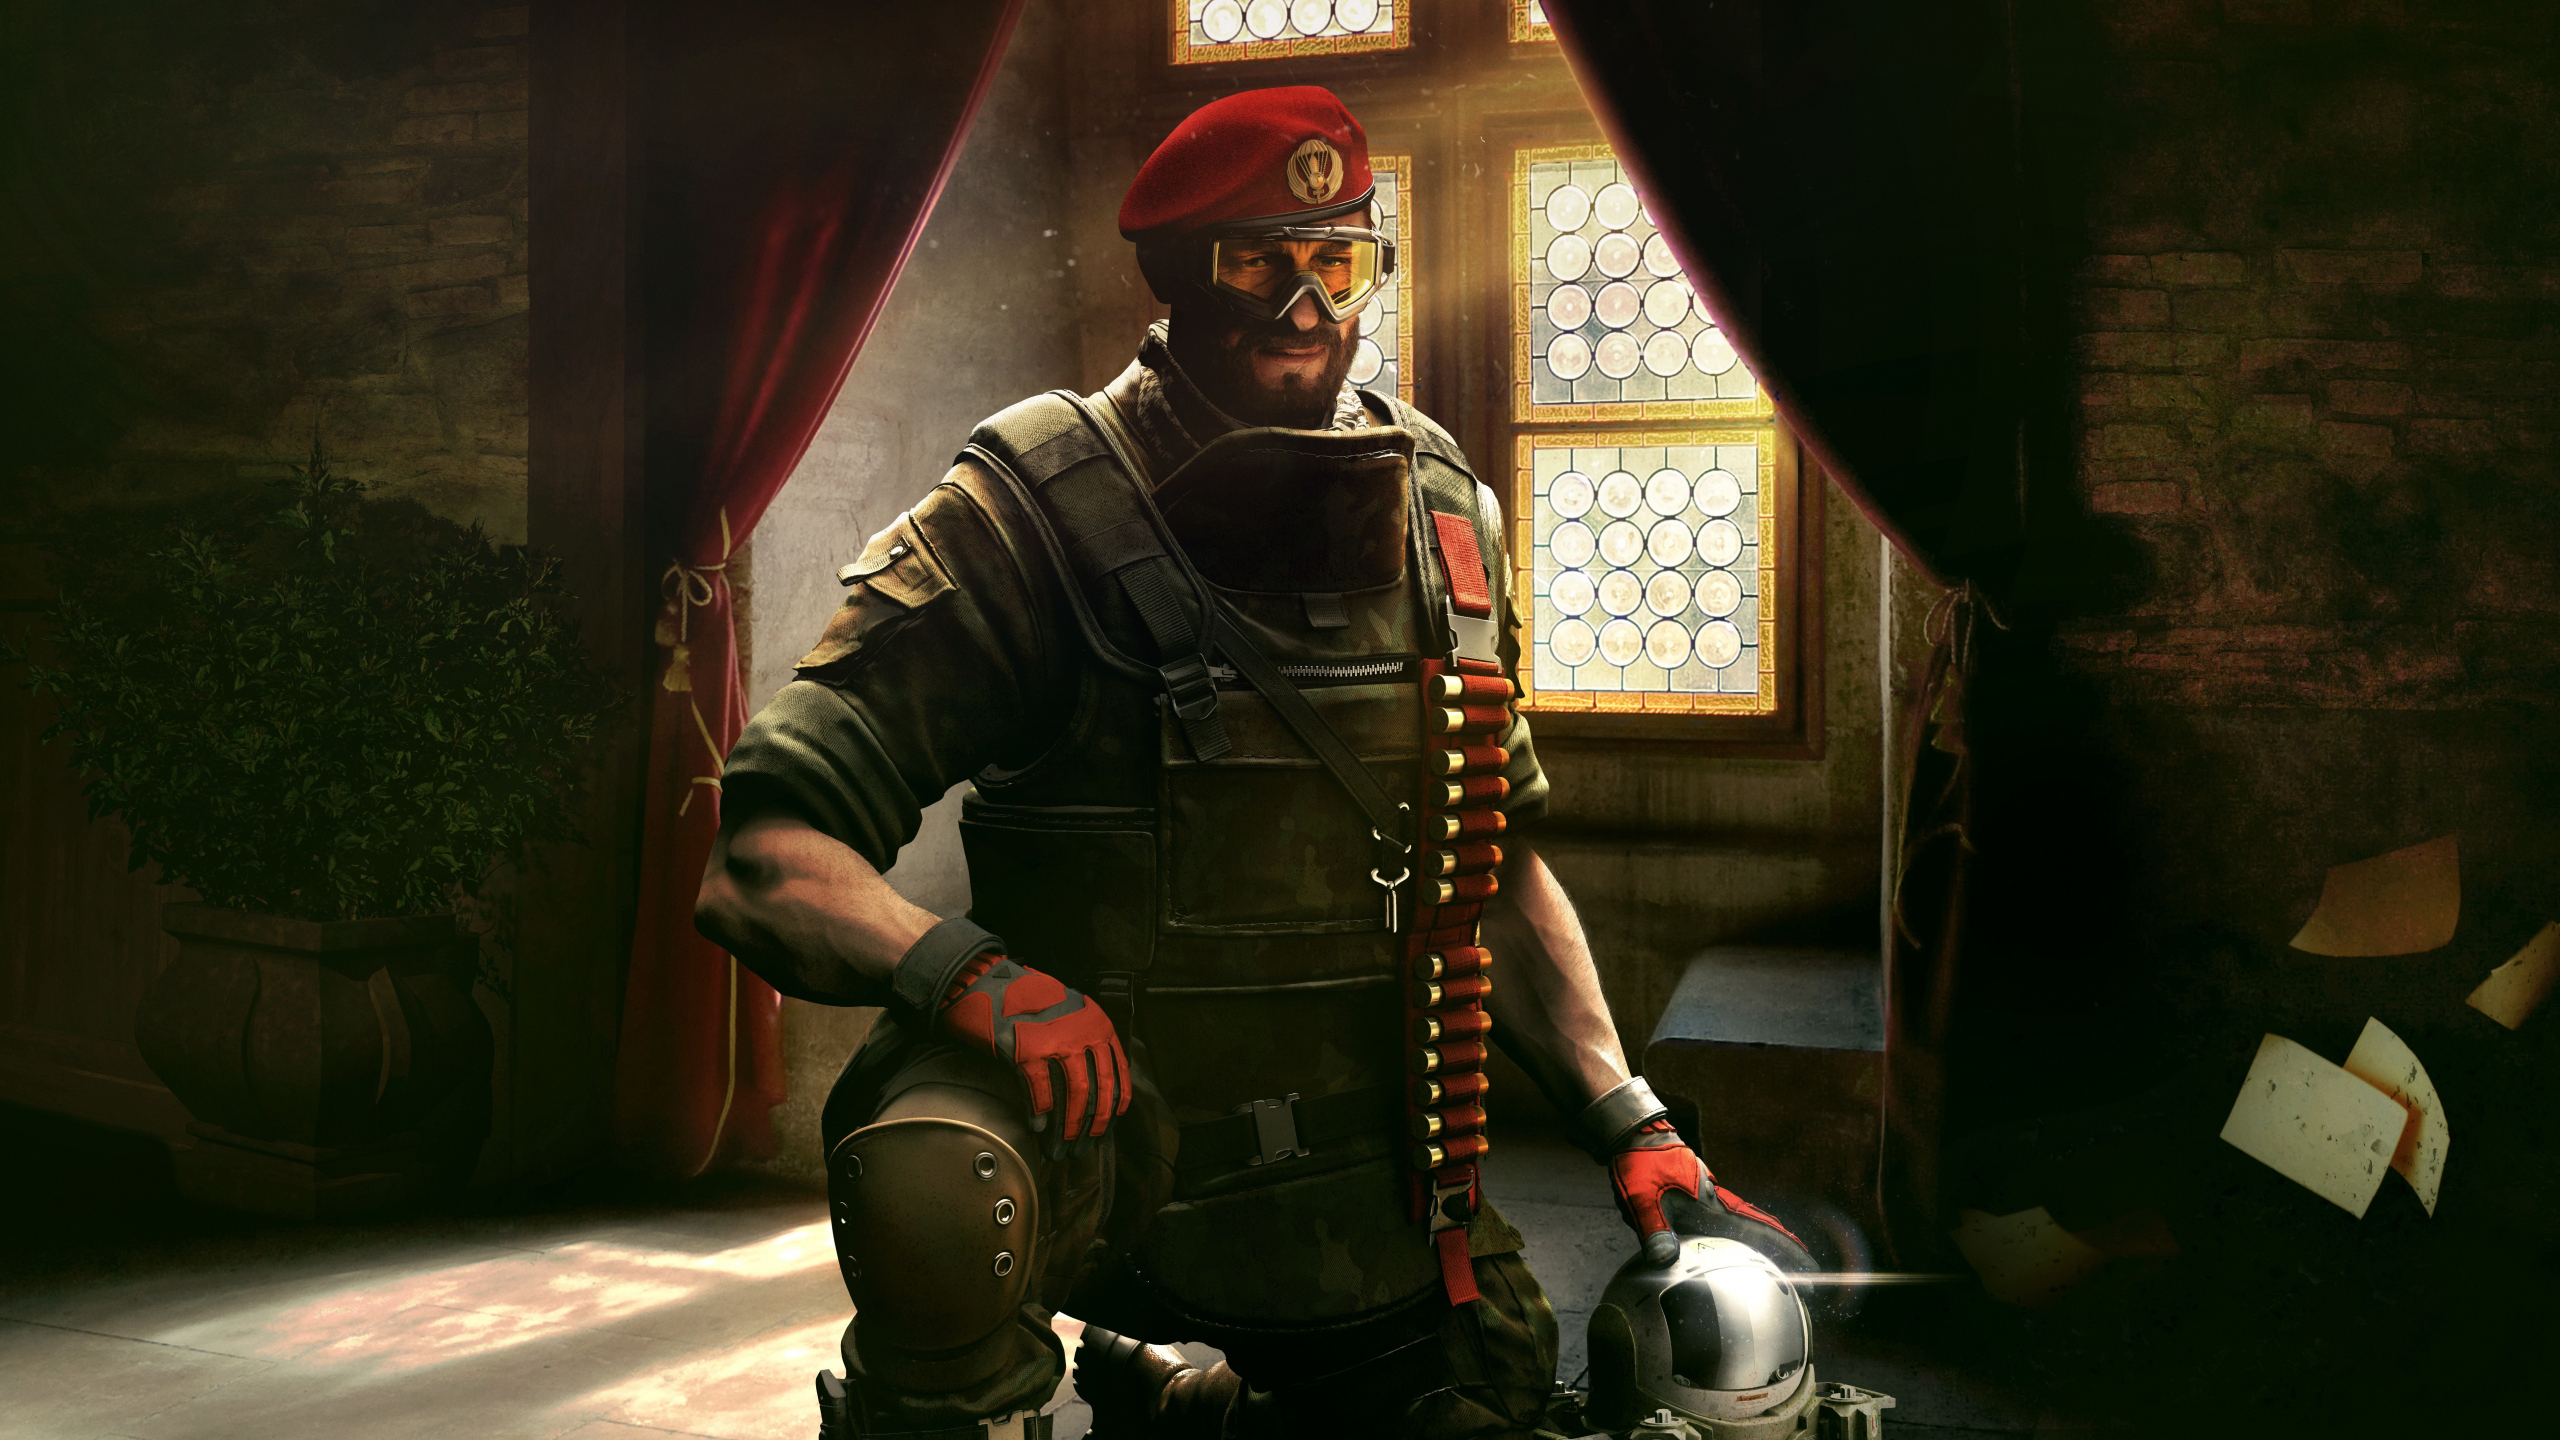 Download 2560x1440 Wallpaper Video Game Soldier Tom